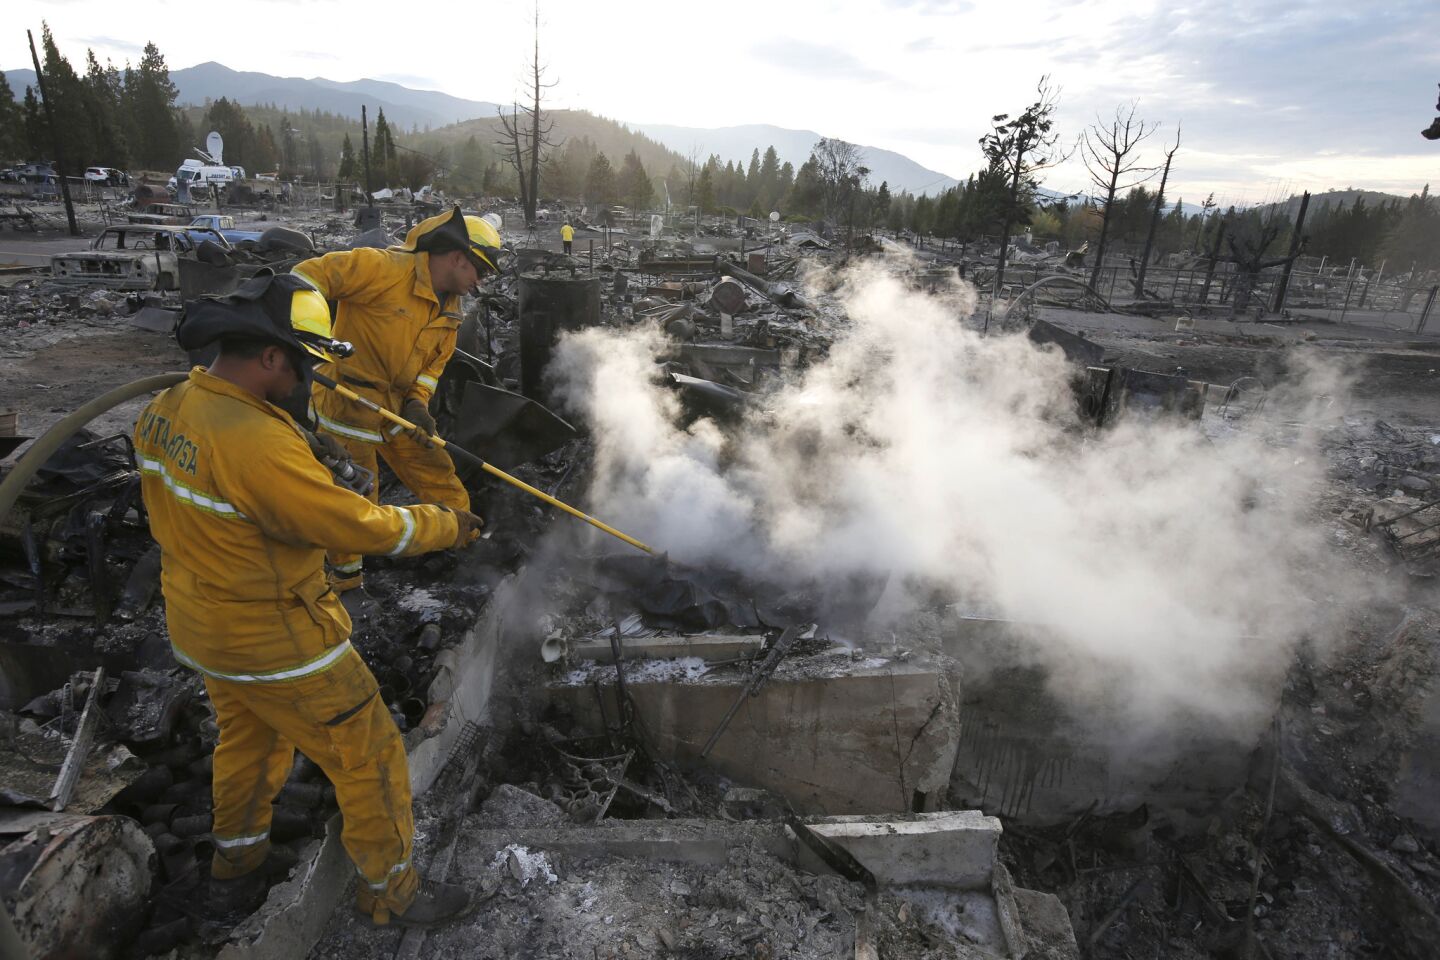 Firefighters put out hotspots at a still smoldering home in a neighborhood destroyed by a devastating fire that rage through Weed, Calif., destroying 150 buildings.